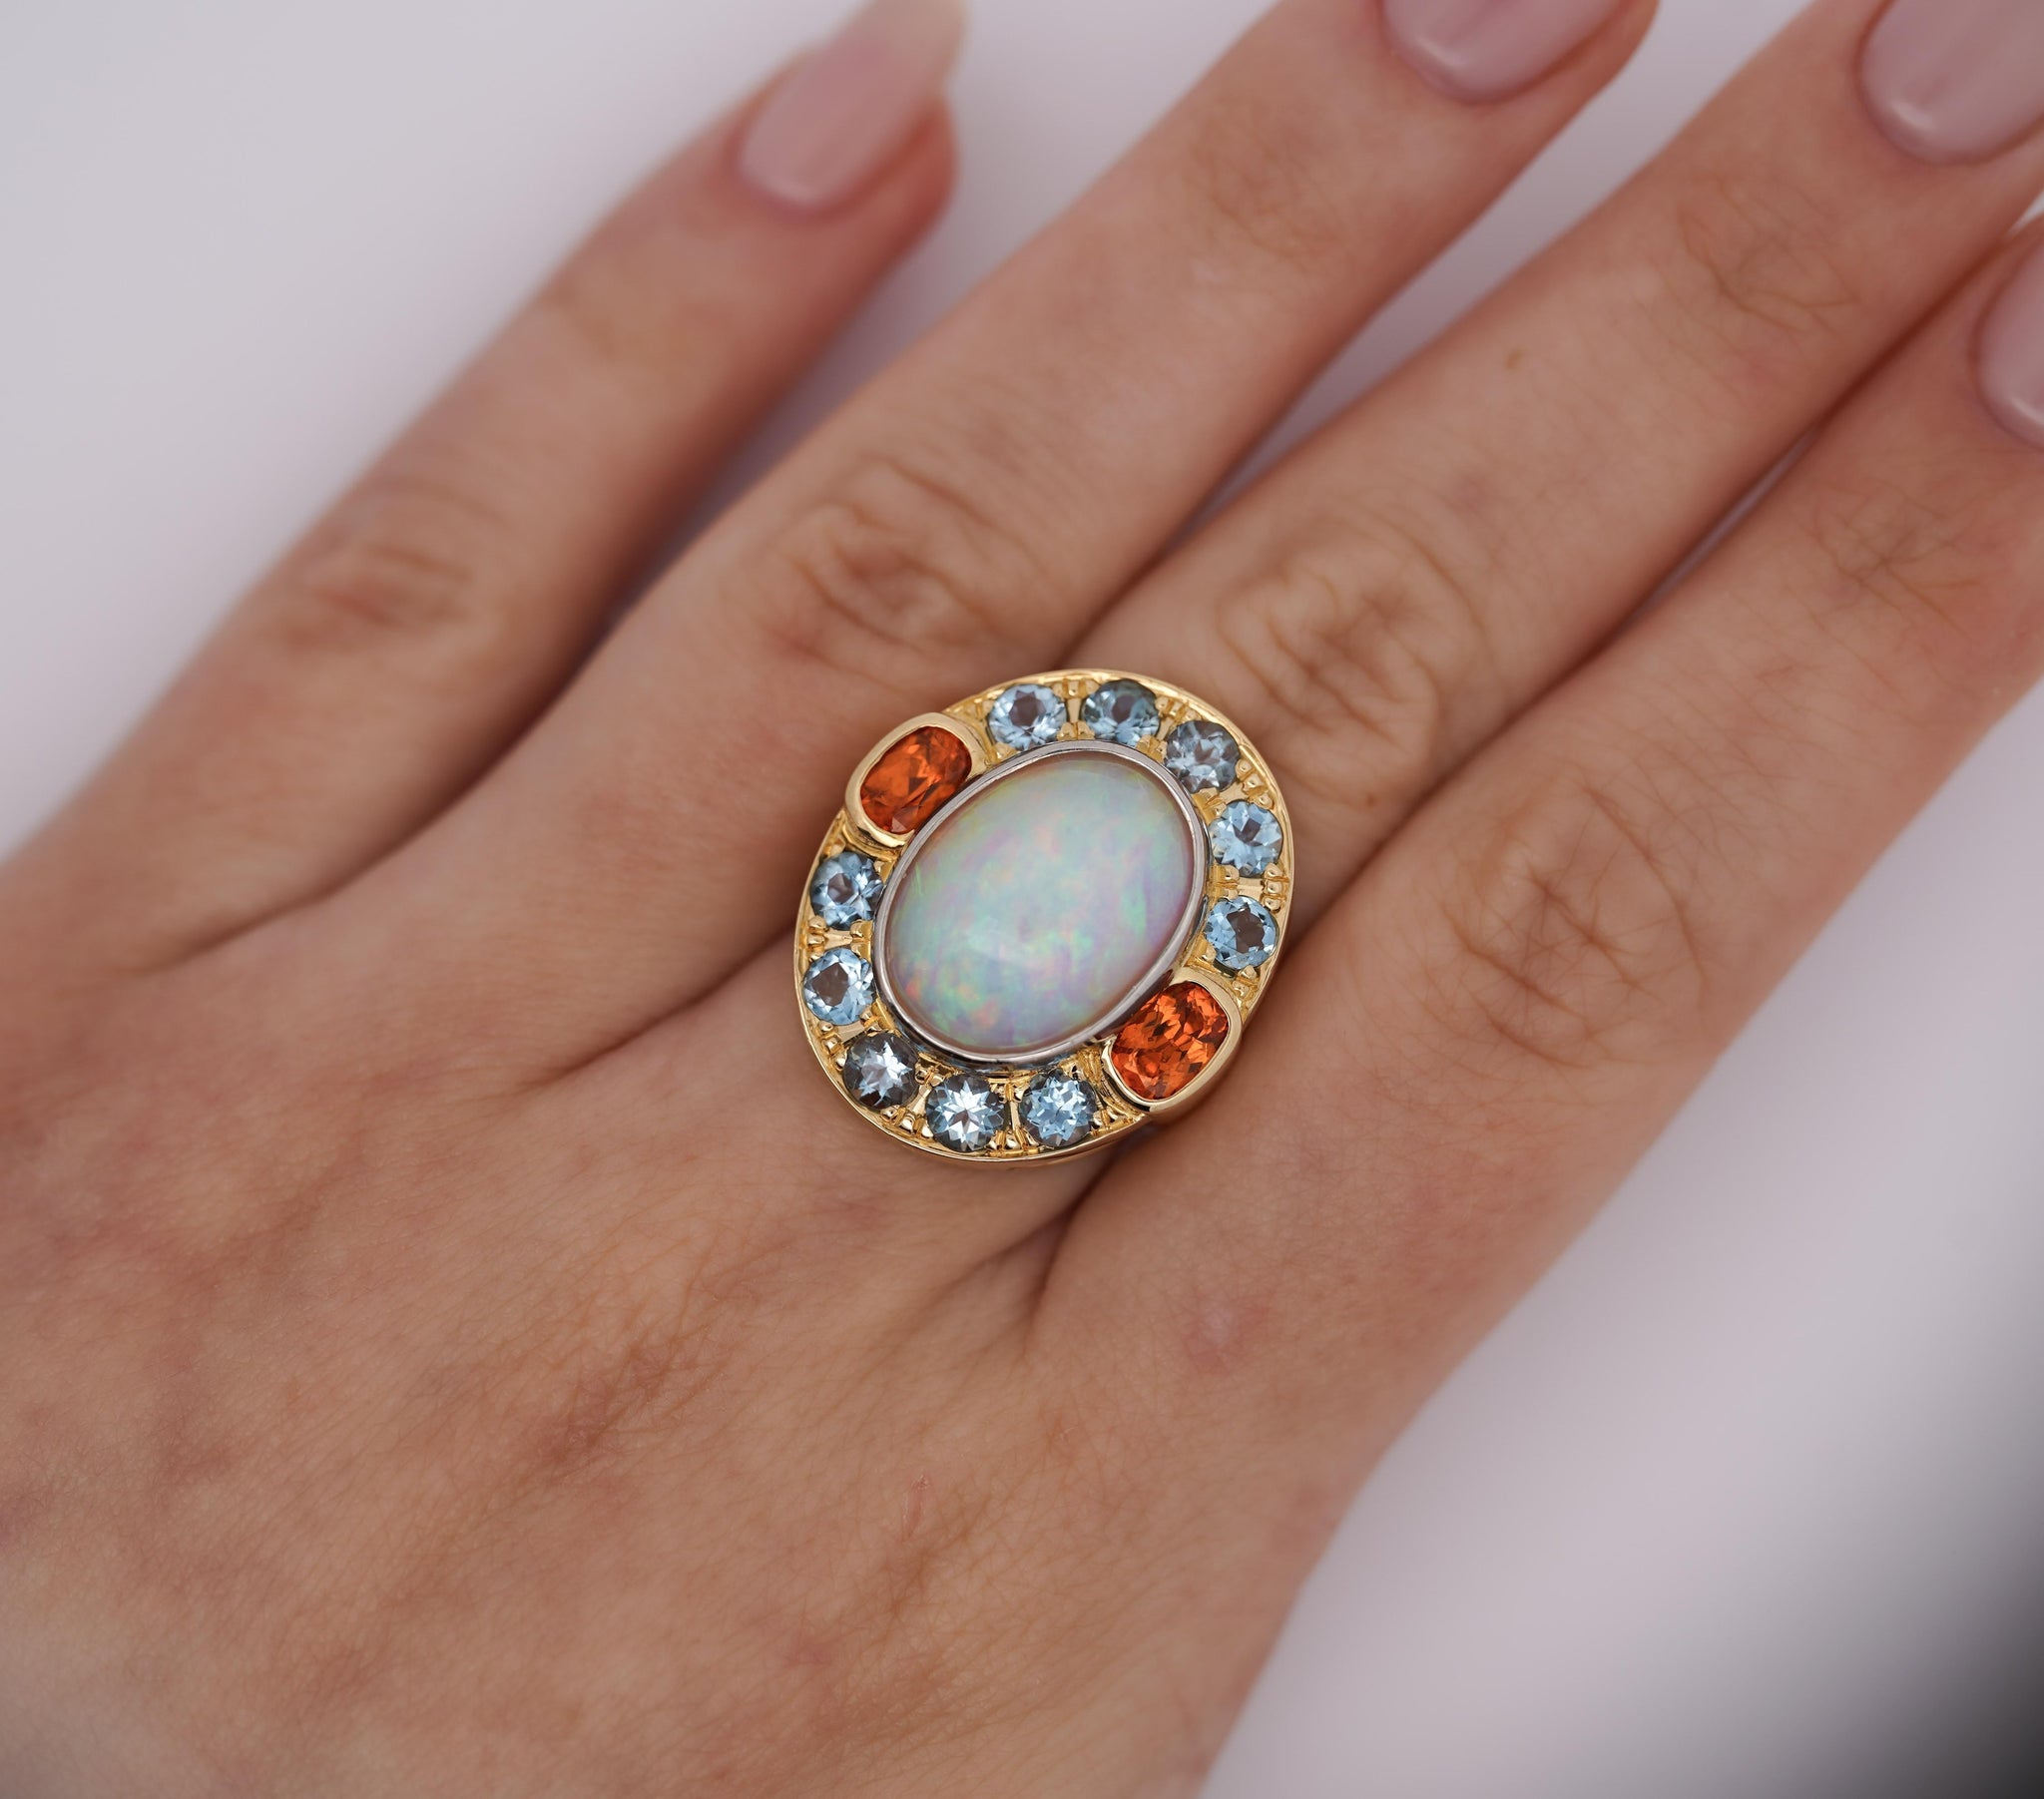 Orange Fire Opal Vintage Style Ring, See Fire on Video 8mm Lab Created Opal,  925 Sterling Vintage Style W/cz Trims - Etsy